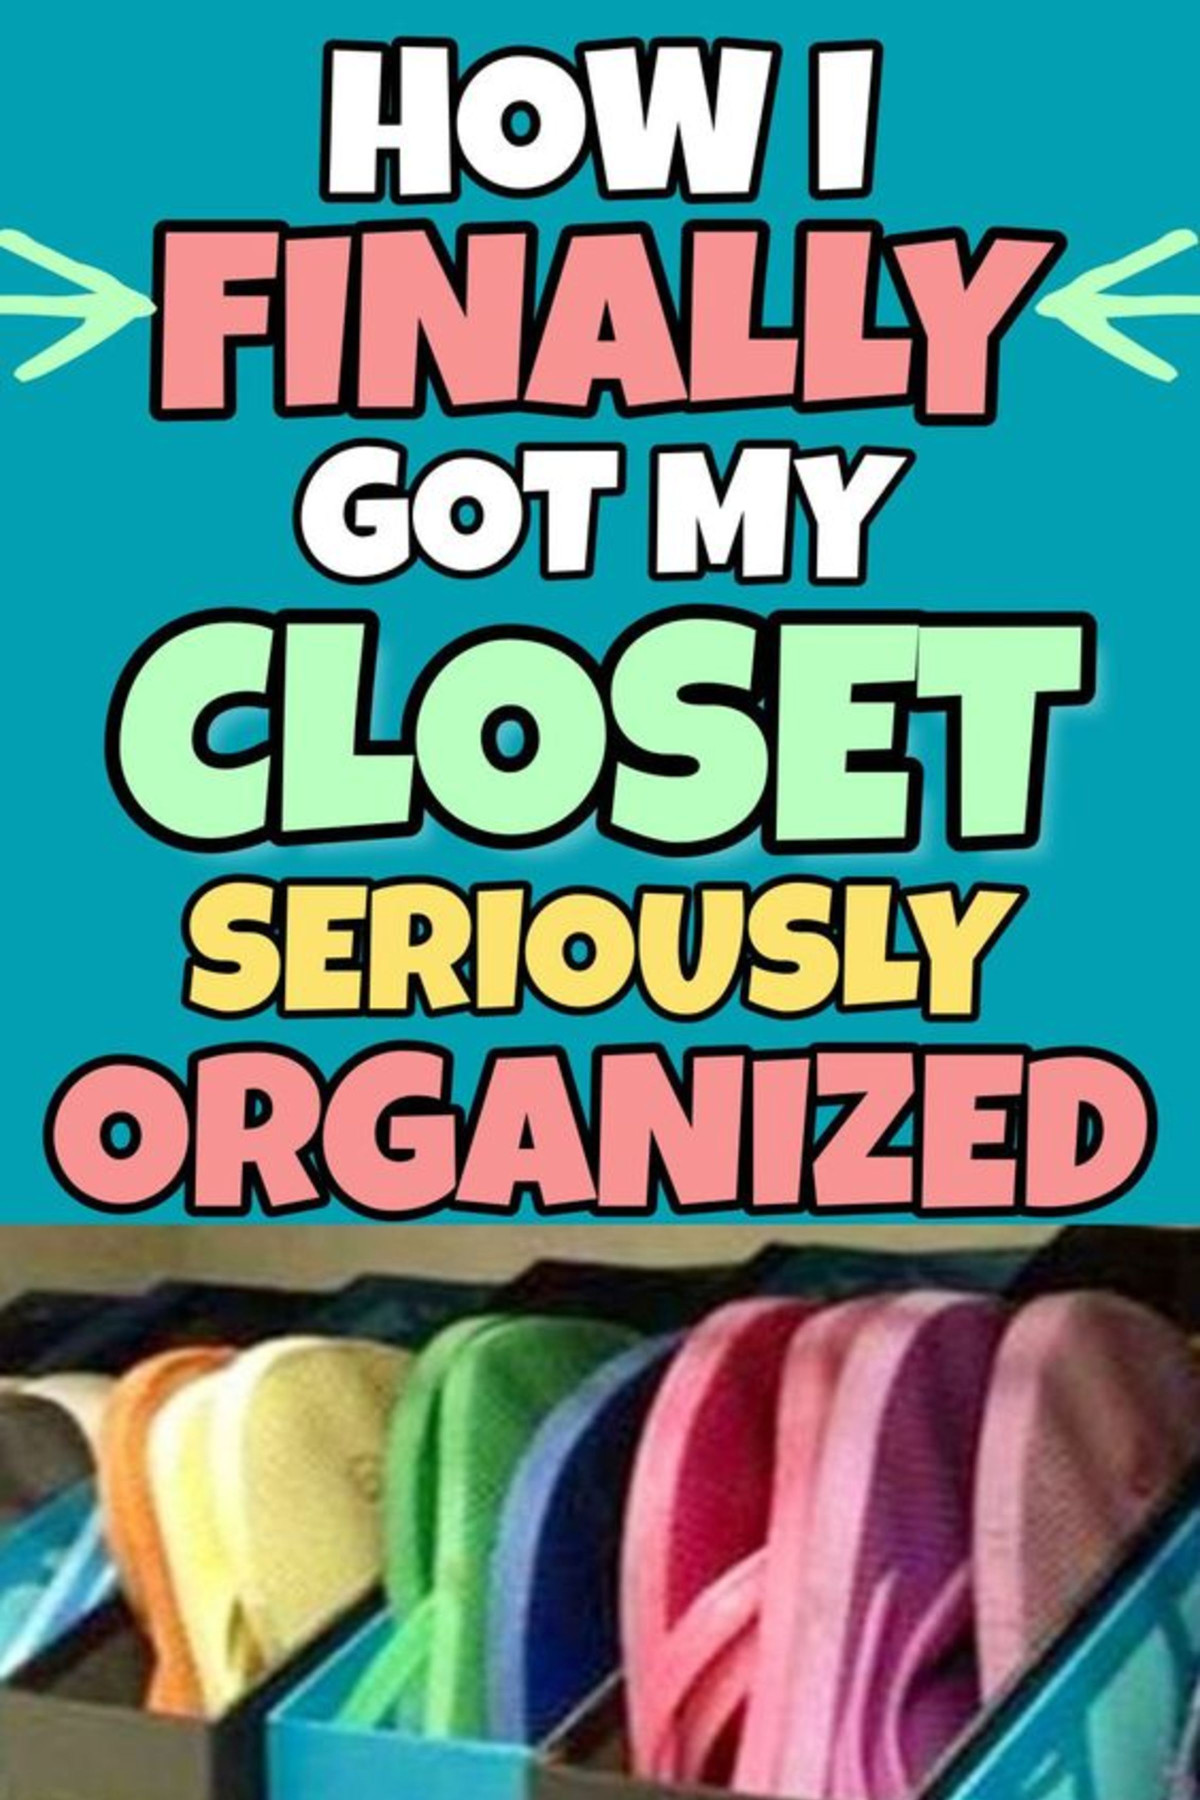 How To Get Your Closet Seriously Organized